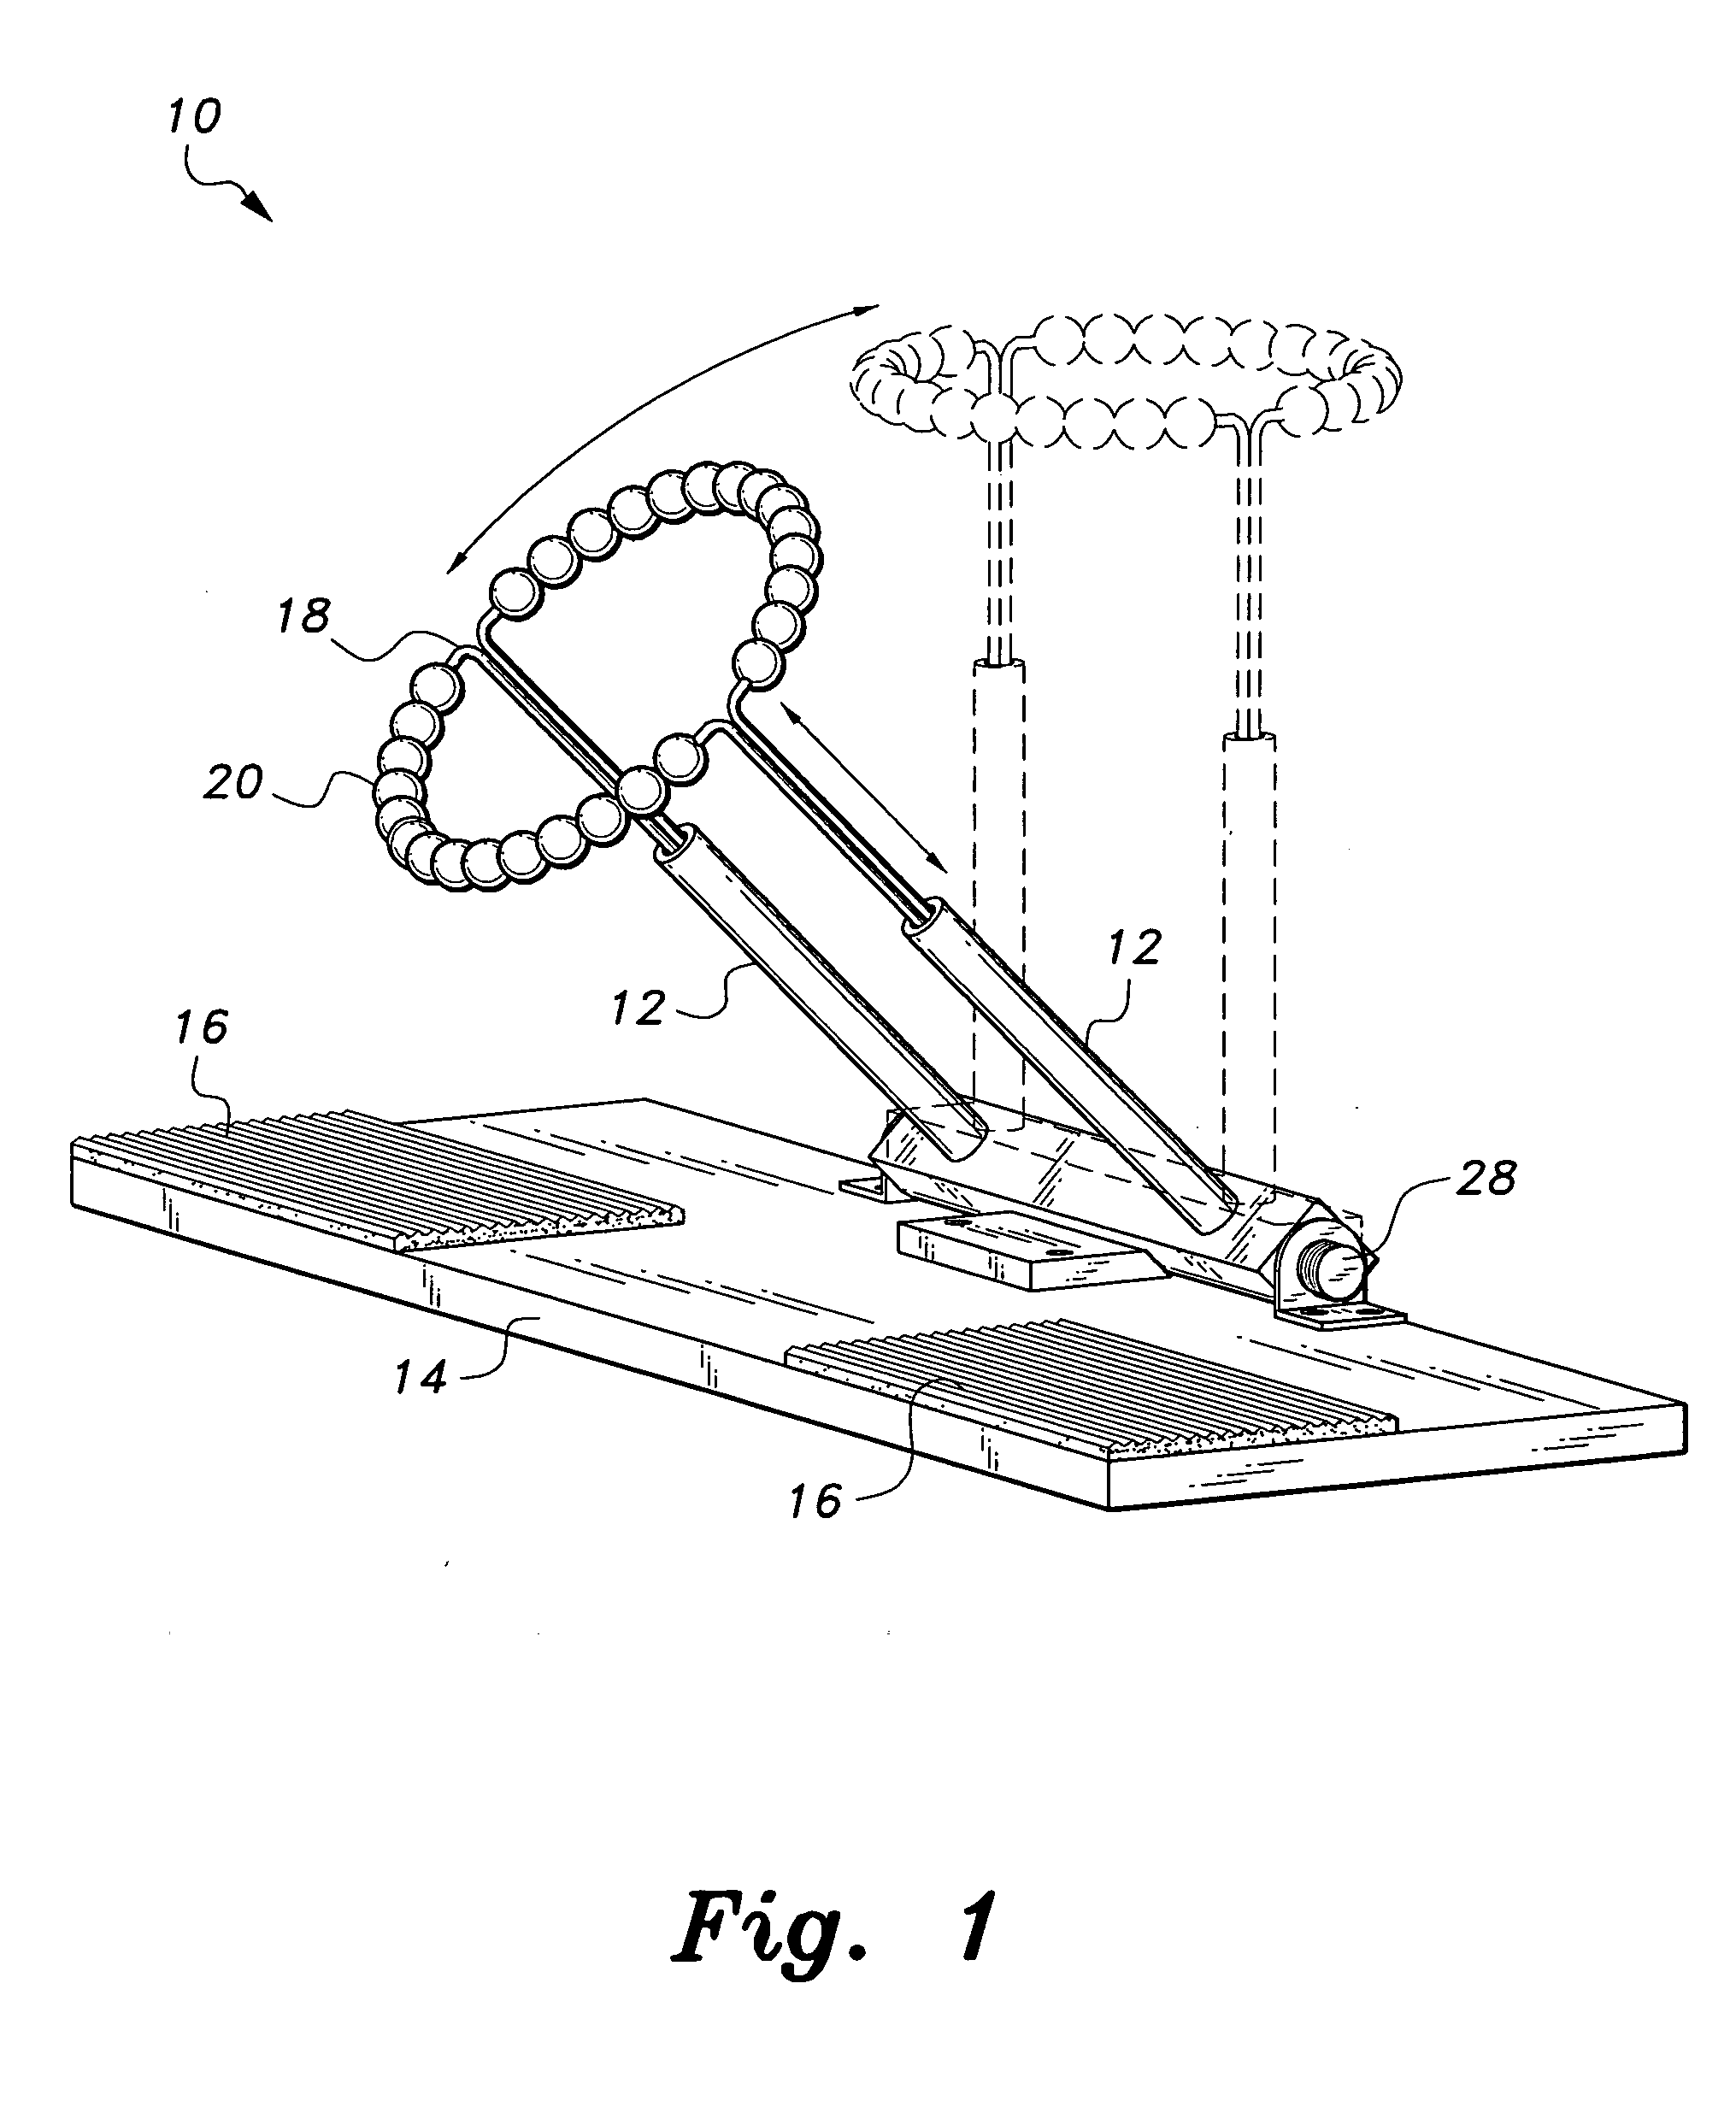 Sock donning device